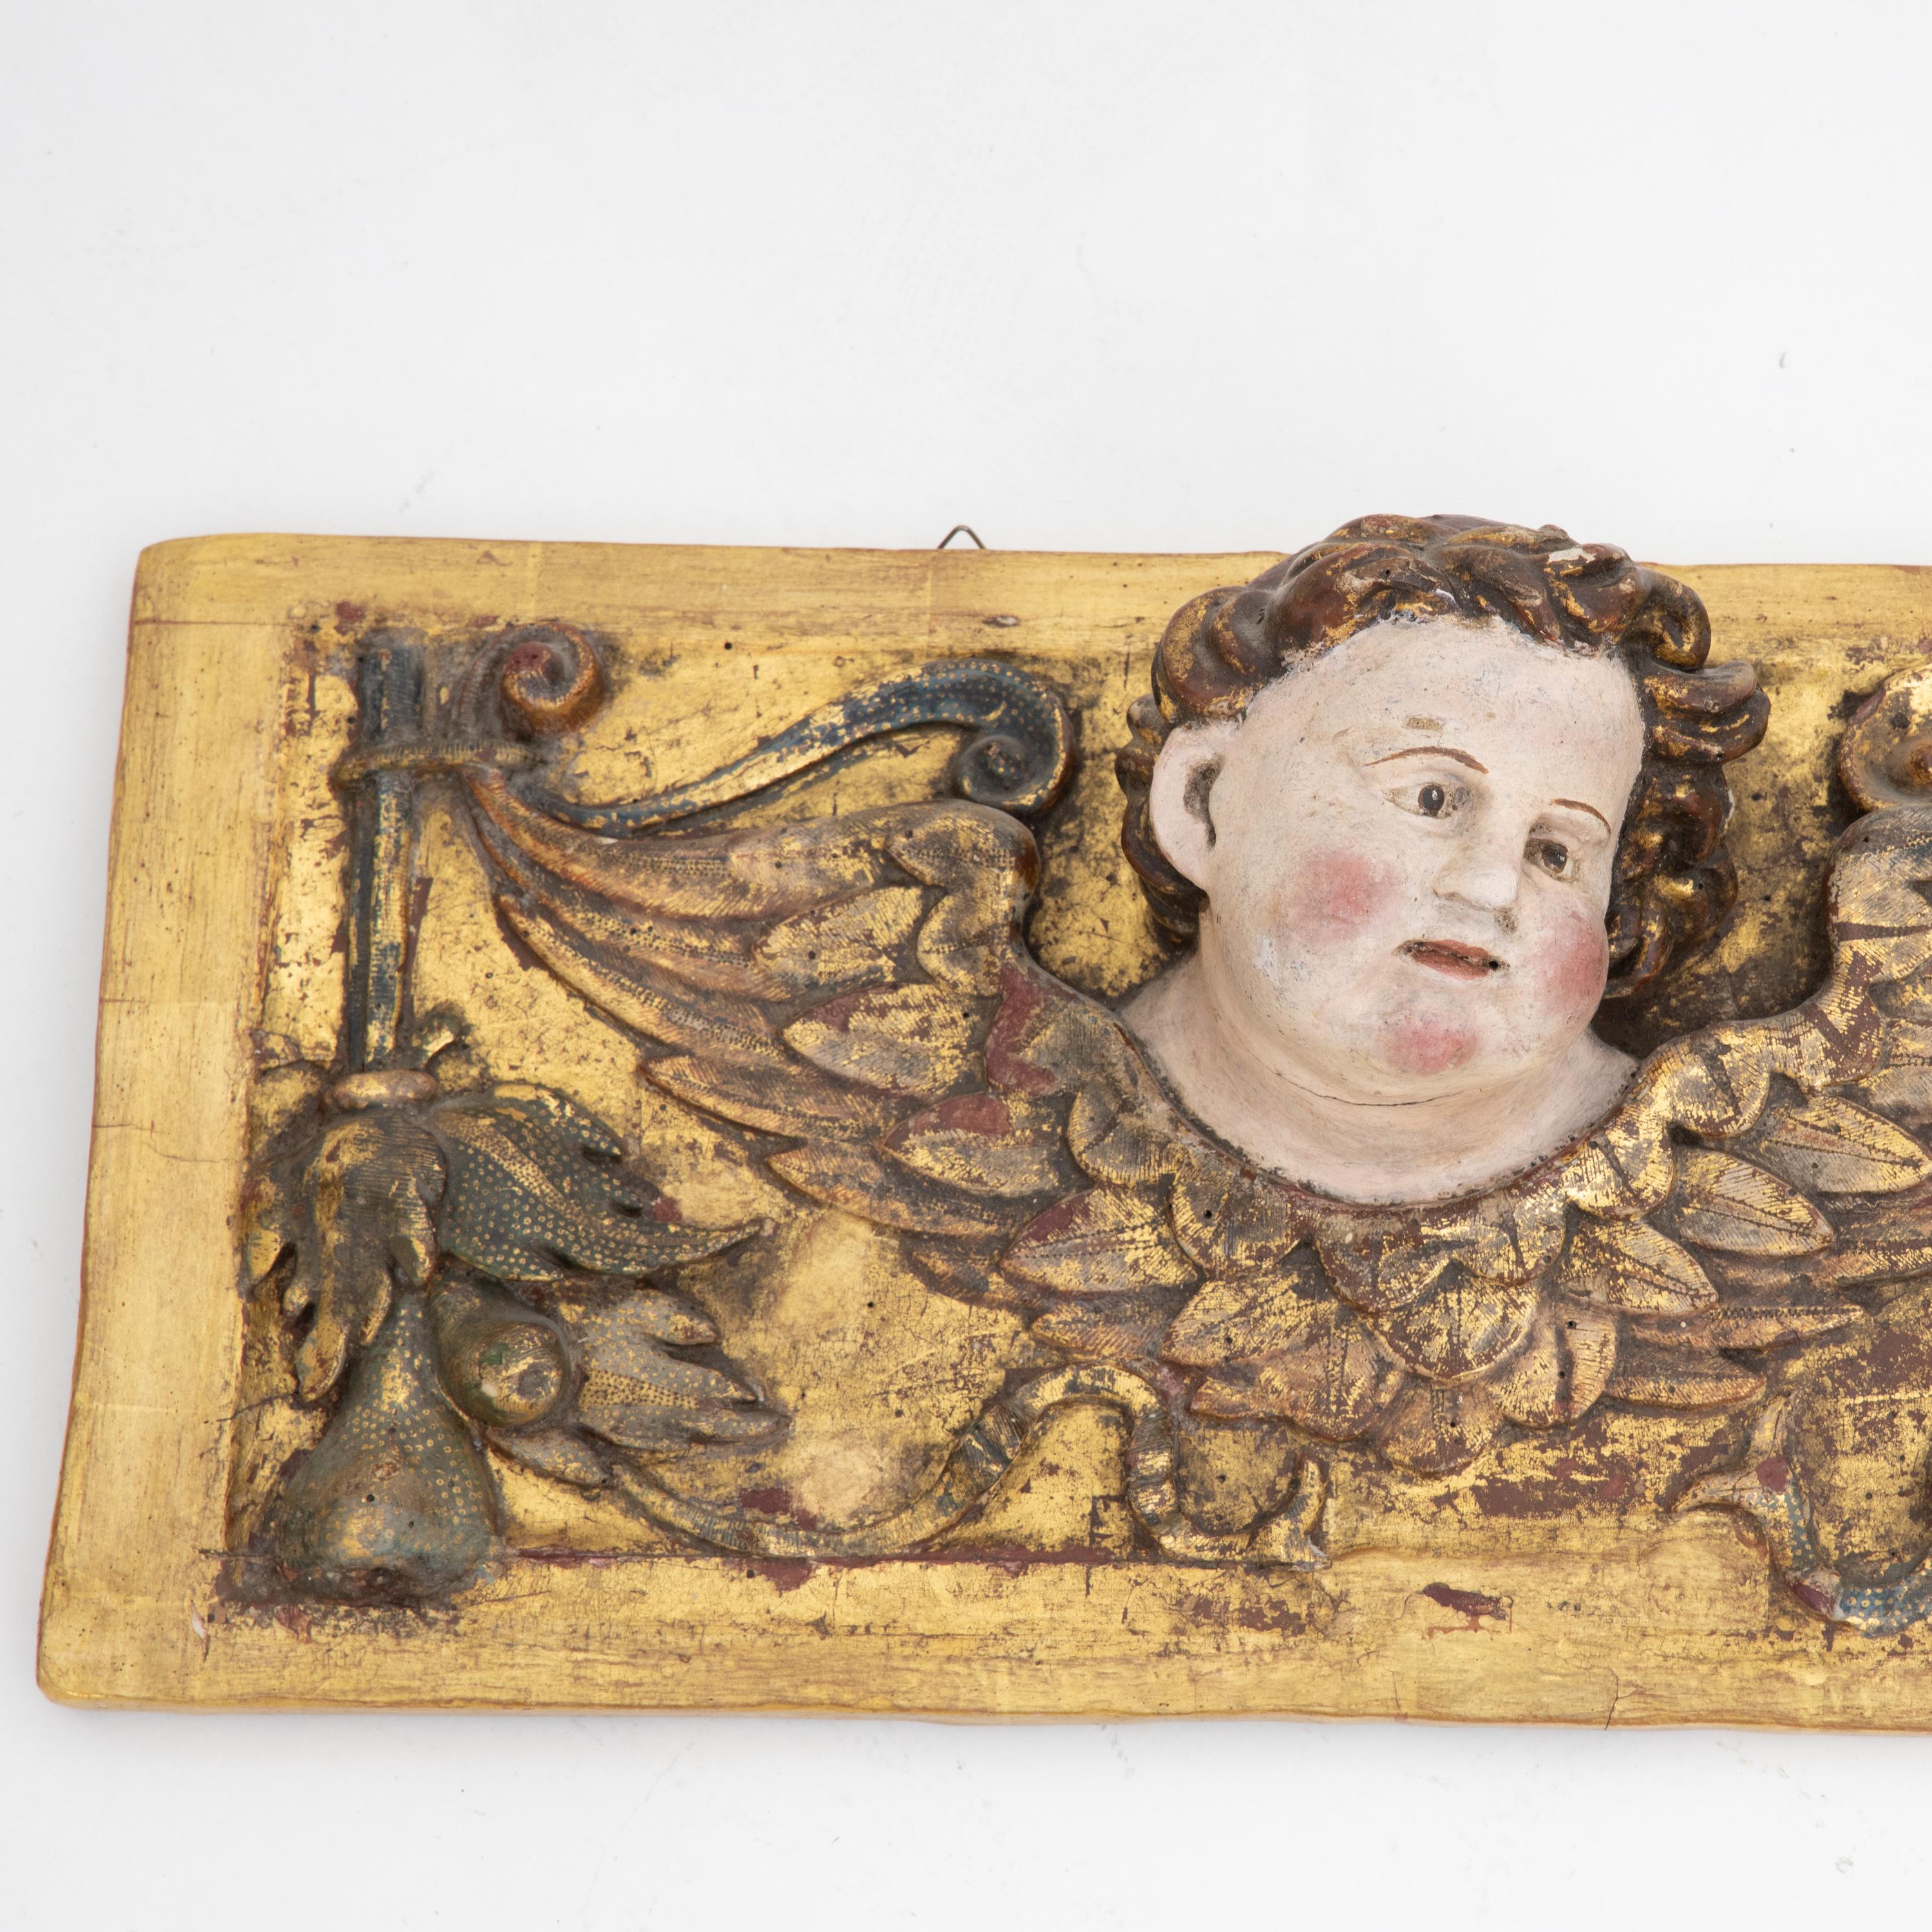 Rectangular wall appliqué with naturalistically painted angel heads with wings. Wood carved and gilded.